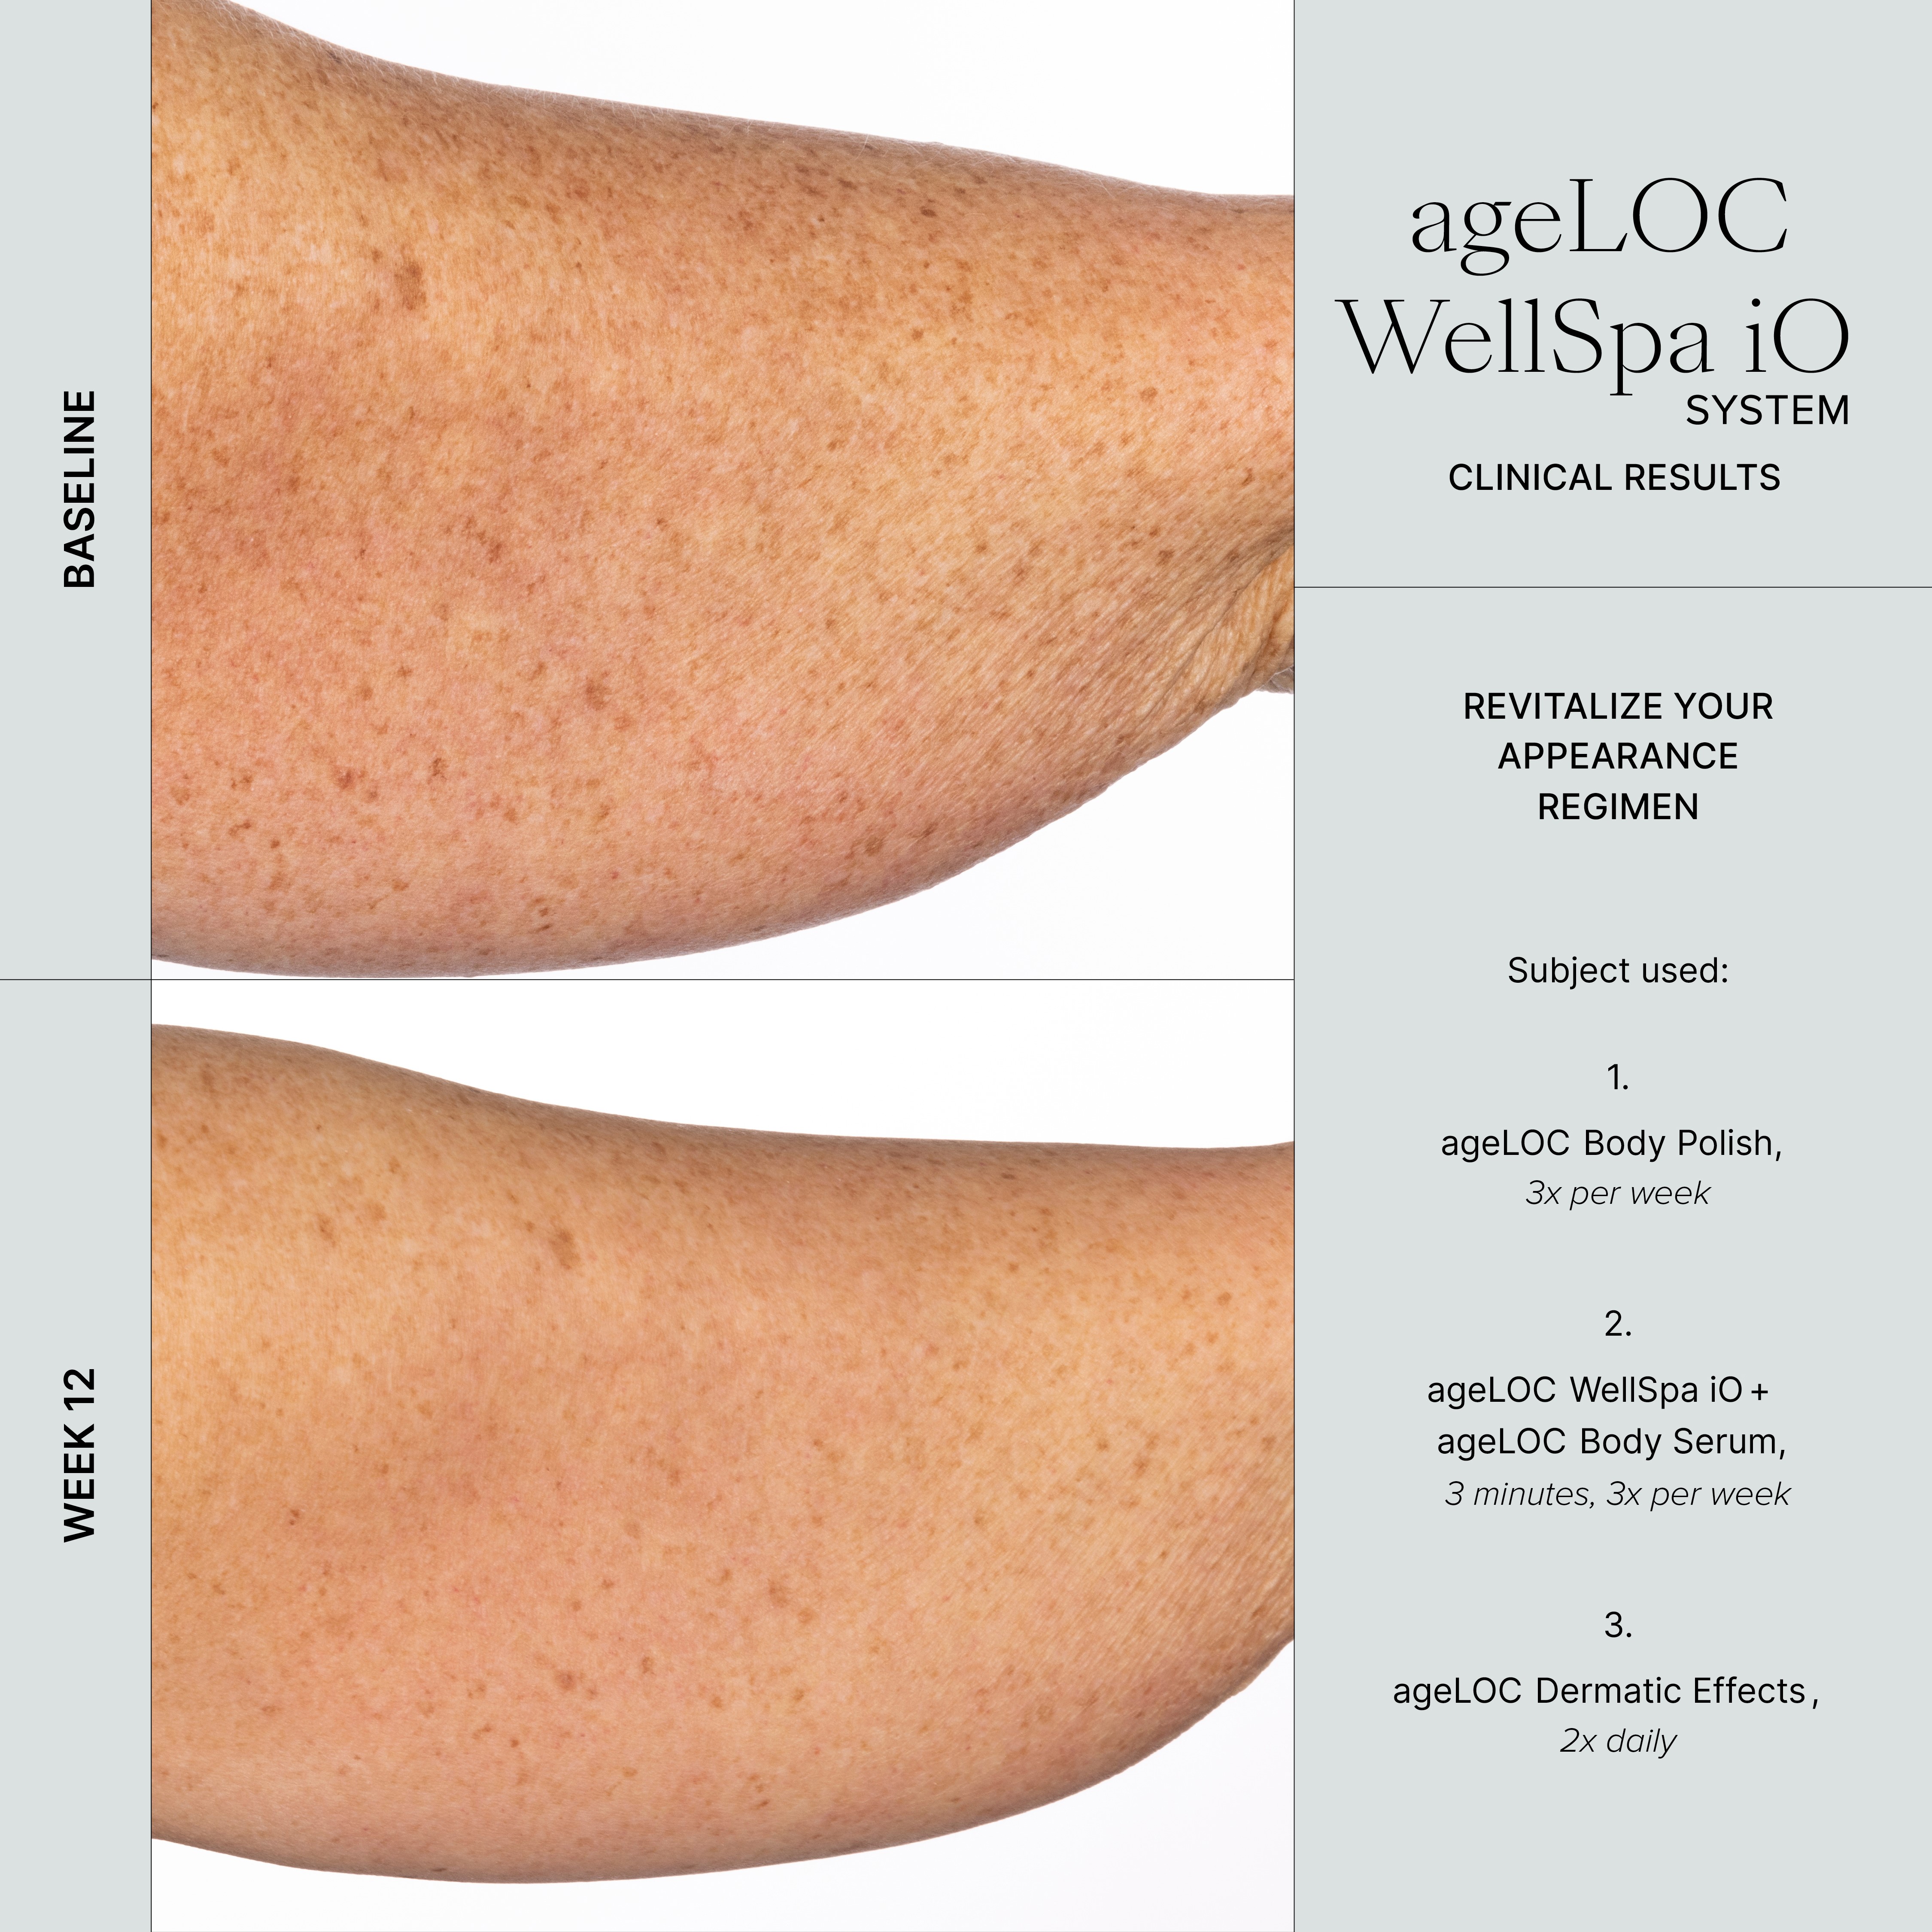 WellSpa iO before after 3min 3x arm 2